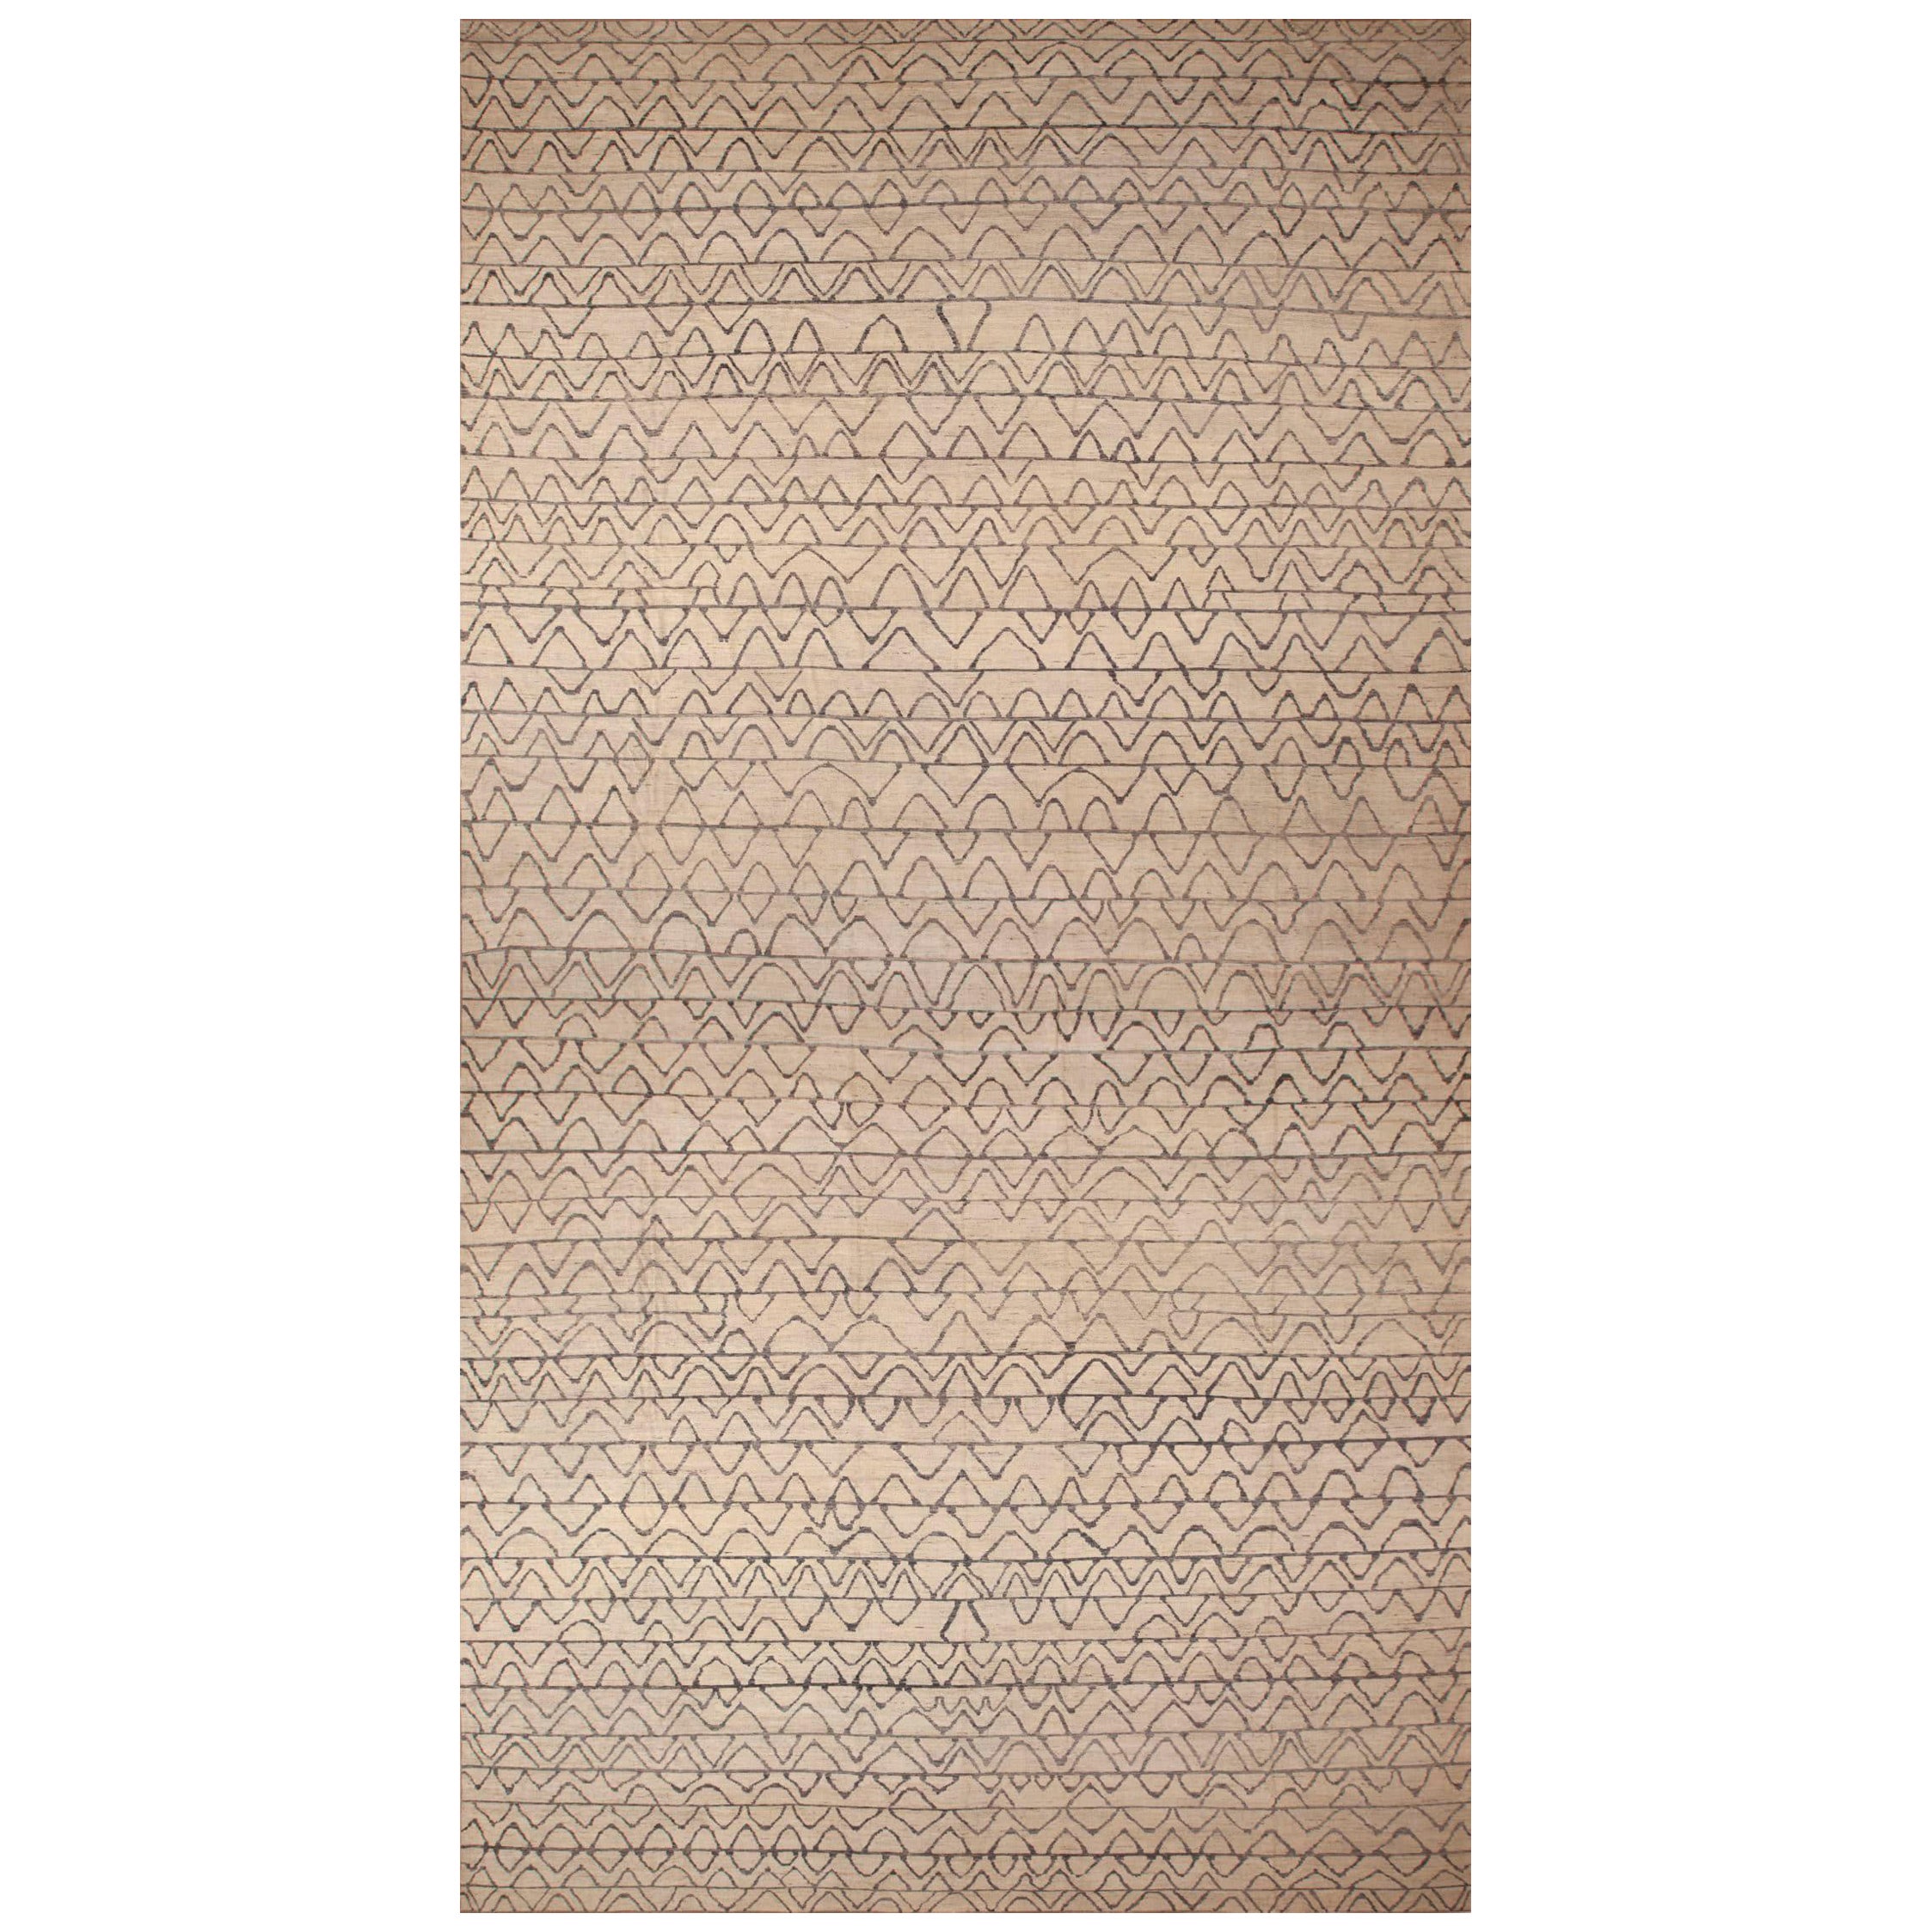 Nazmiyal Collection Oversized Tribal Chevron Modern Area Rug 17' x 31'5" For Sale